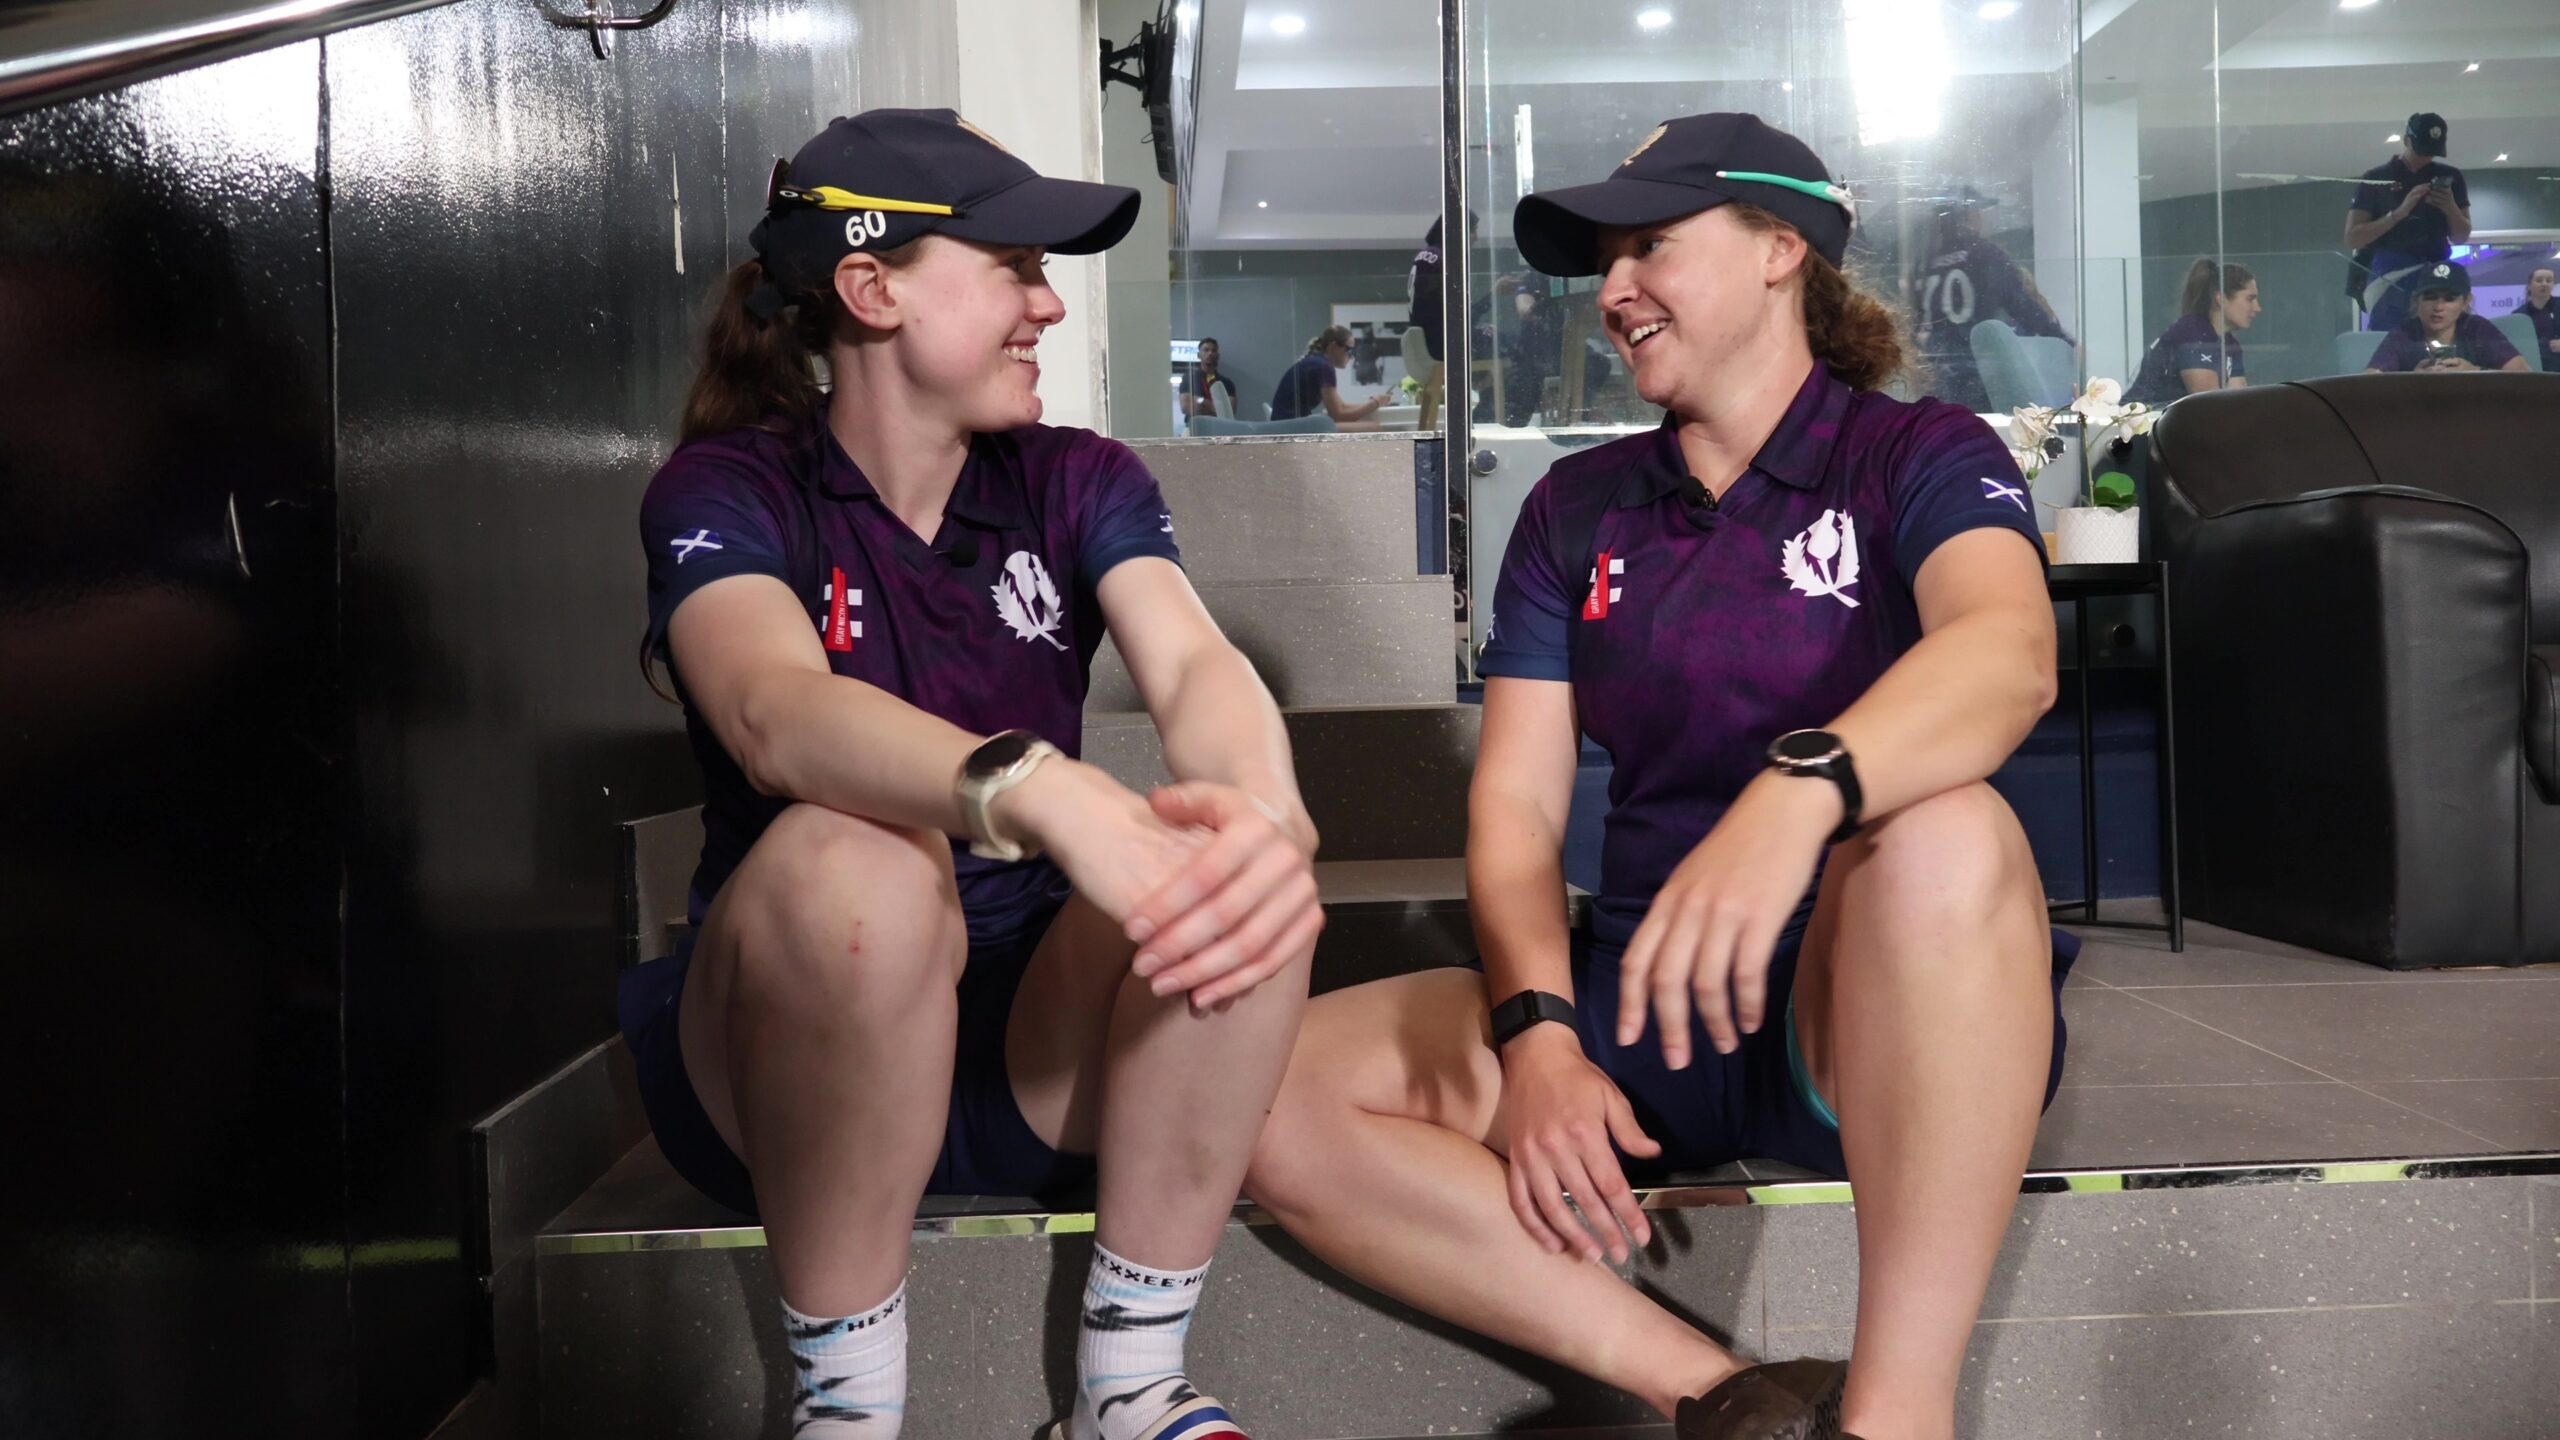 VIDEO: SARAH BRYCE AND KATHRYN BRYCE REFLECT ON HISTORIC WORLD CUP QUALIFICATION